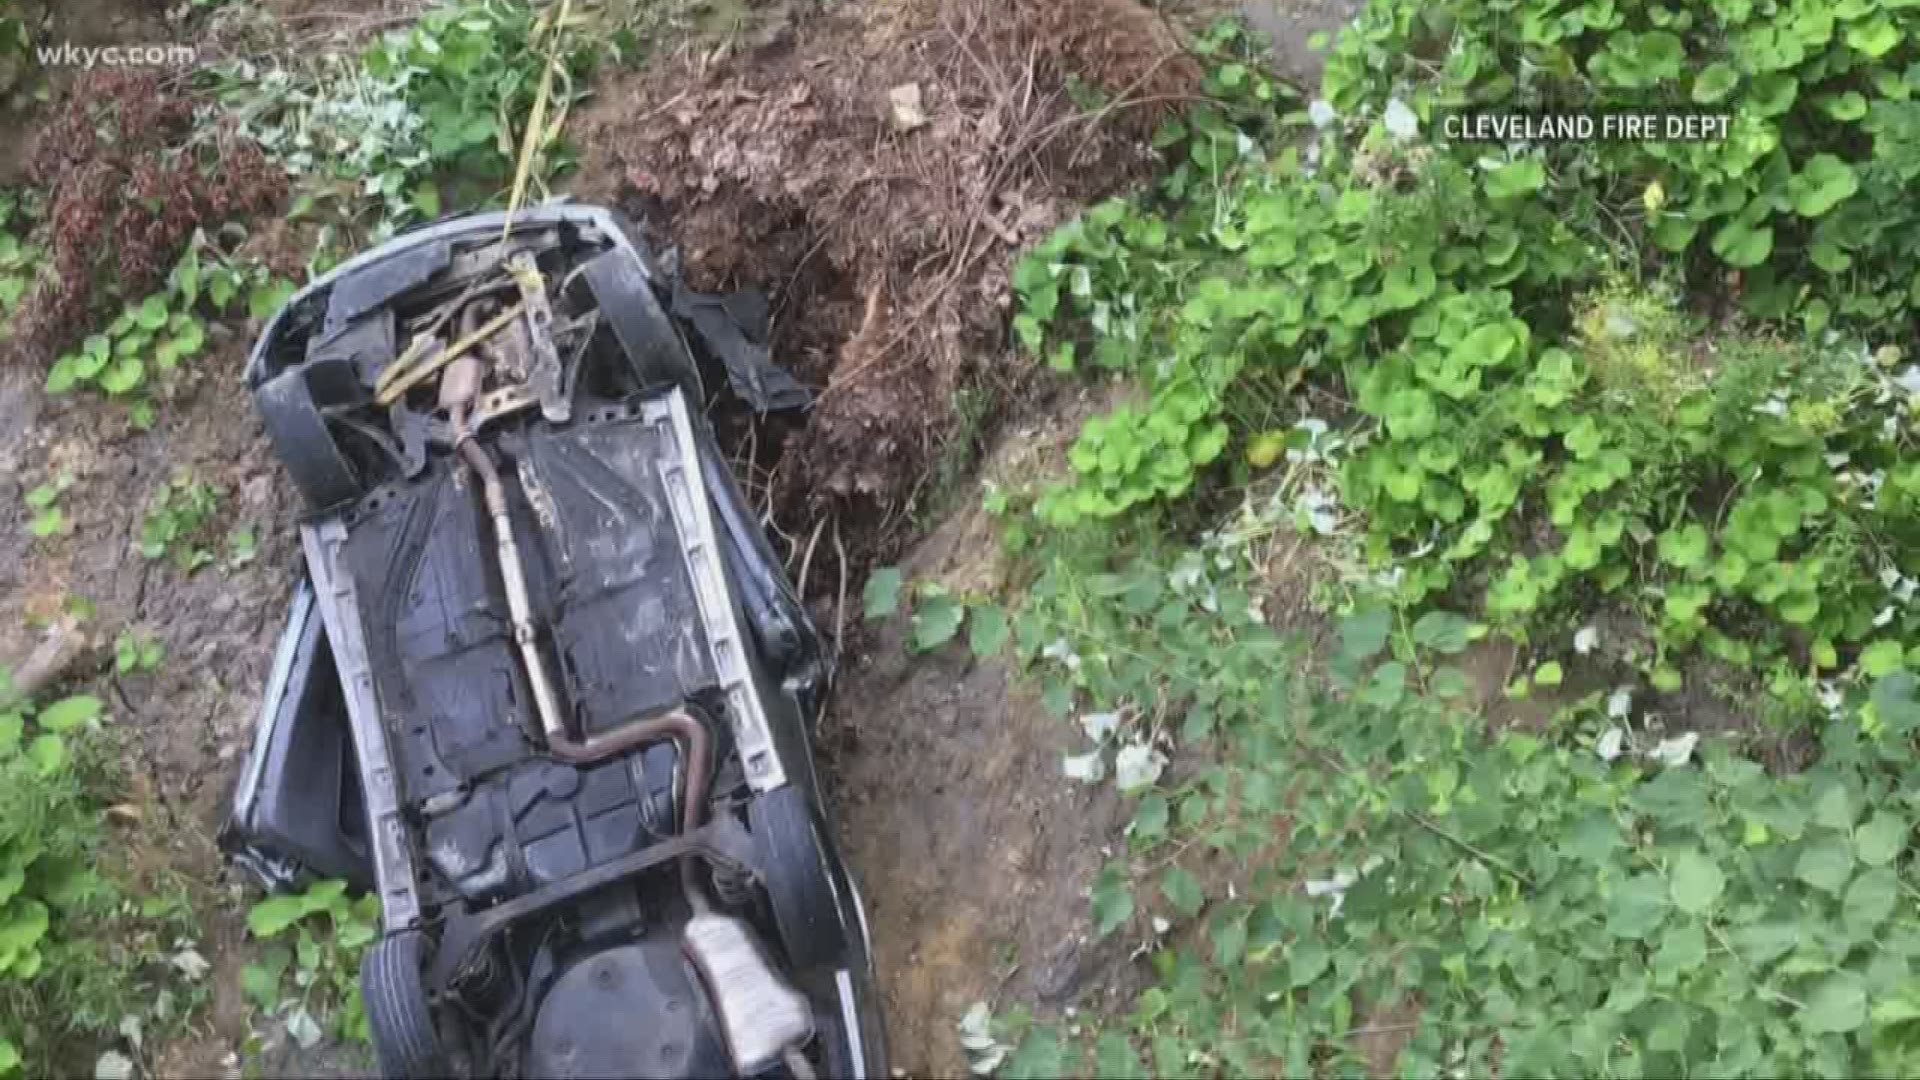 Police investigating car found flipped over cliff